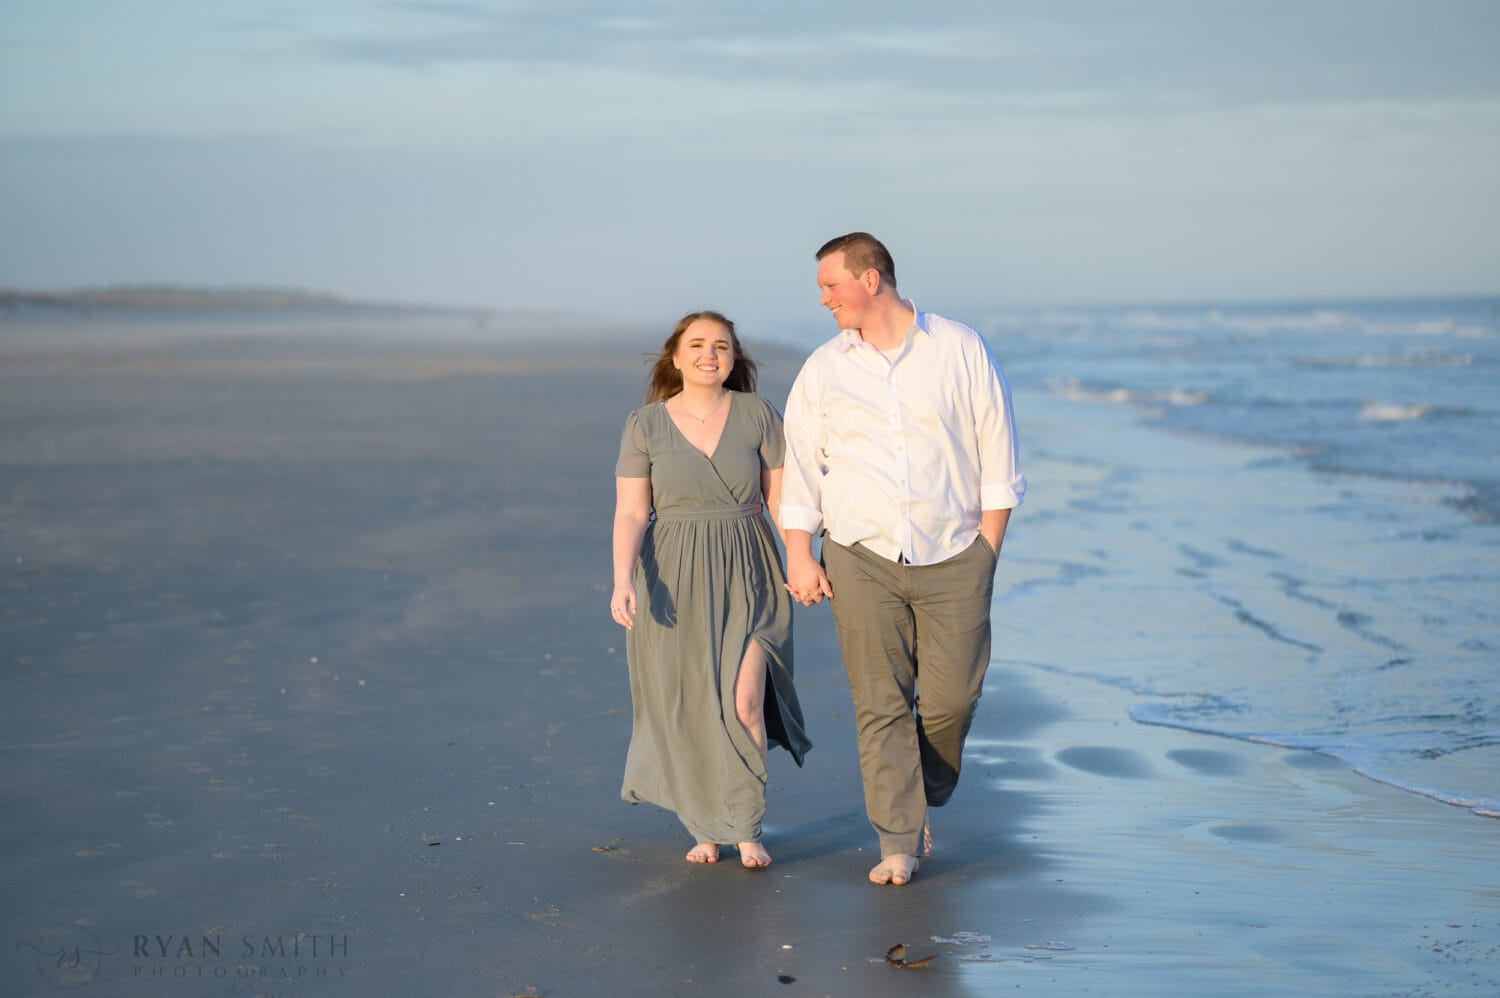 Walking together by the ocean - Huntington Beach State Park - Myrtle Beach